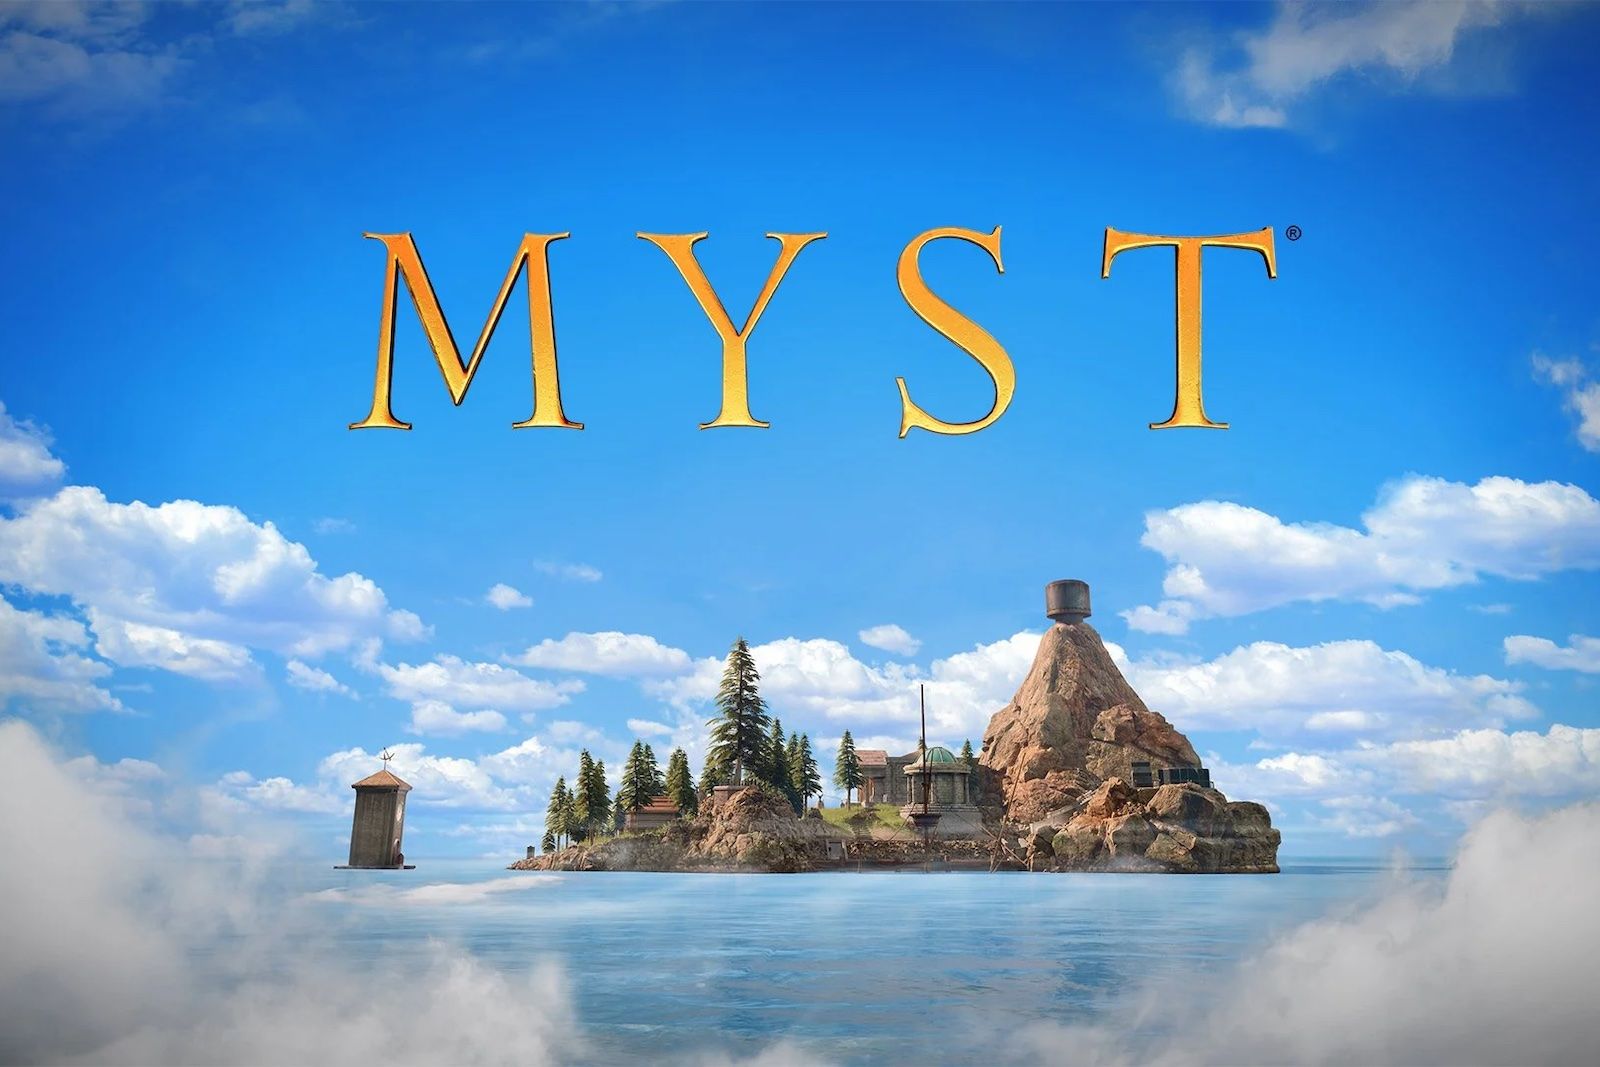 Myst is getting a remastered iPhone and iPad version for its 30th birthday